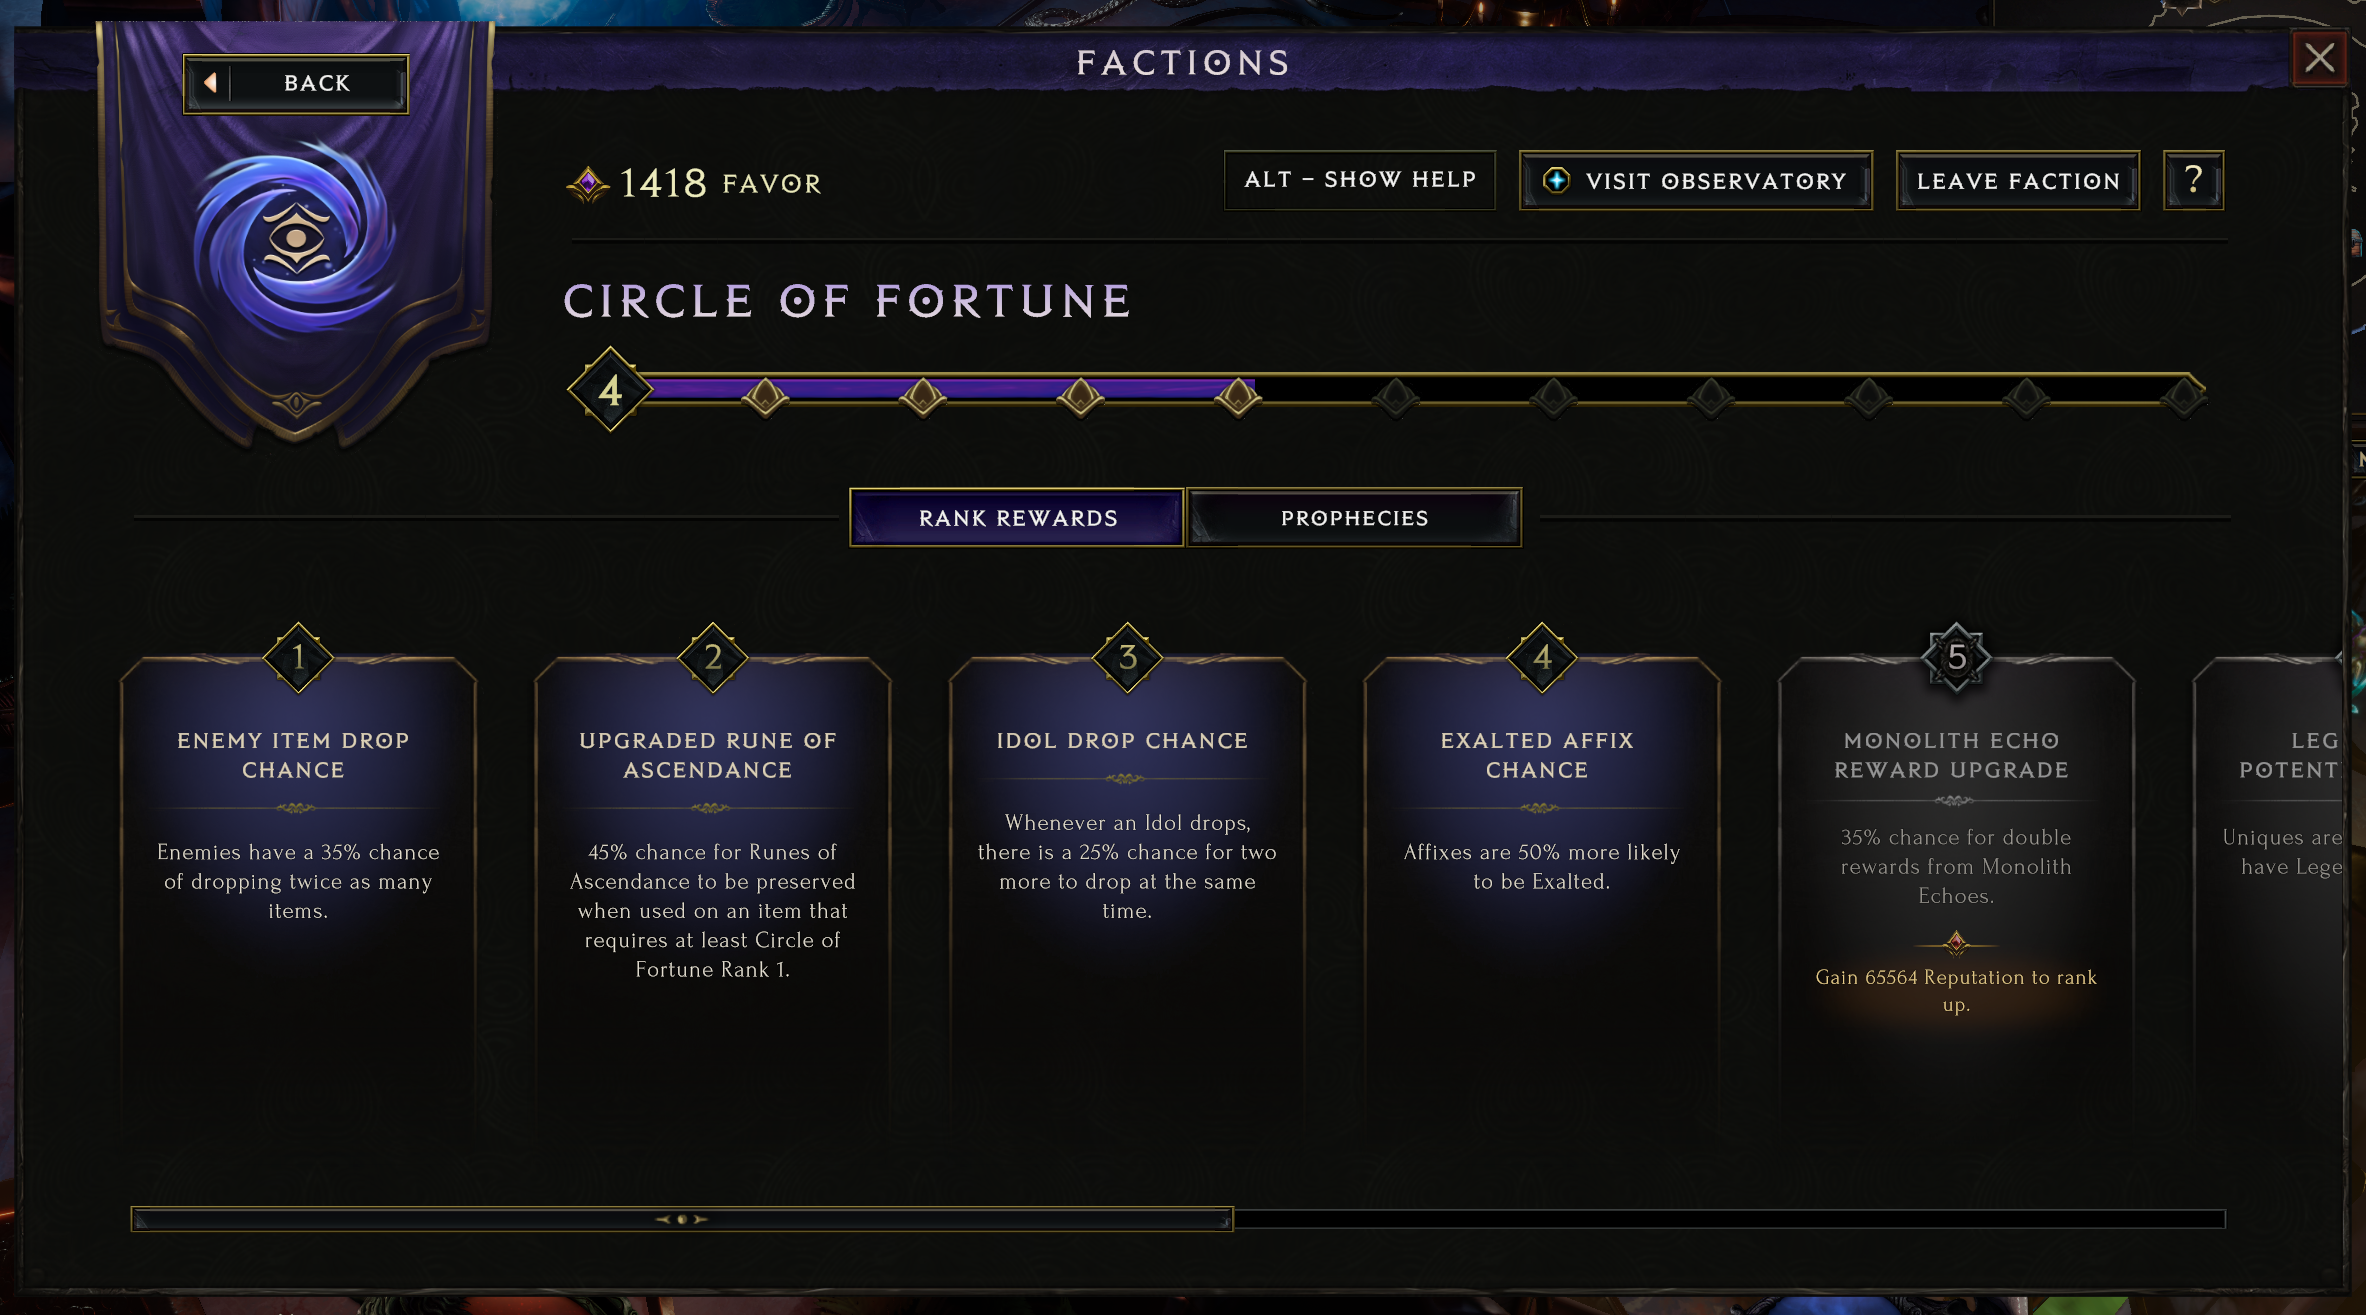 Circle of Fortune Reputation and Ranks